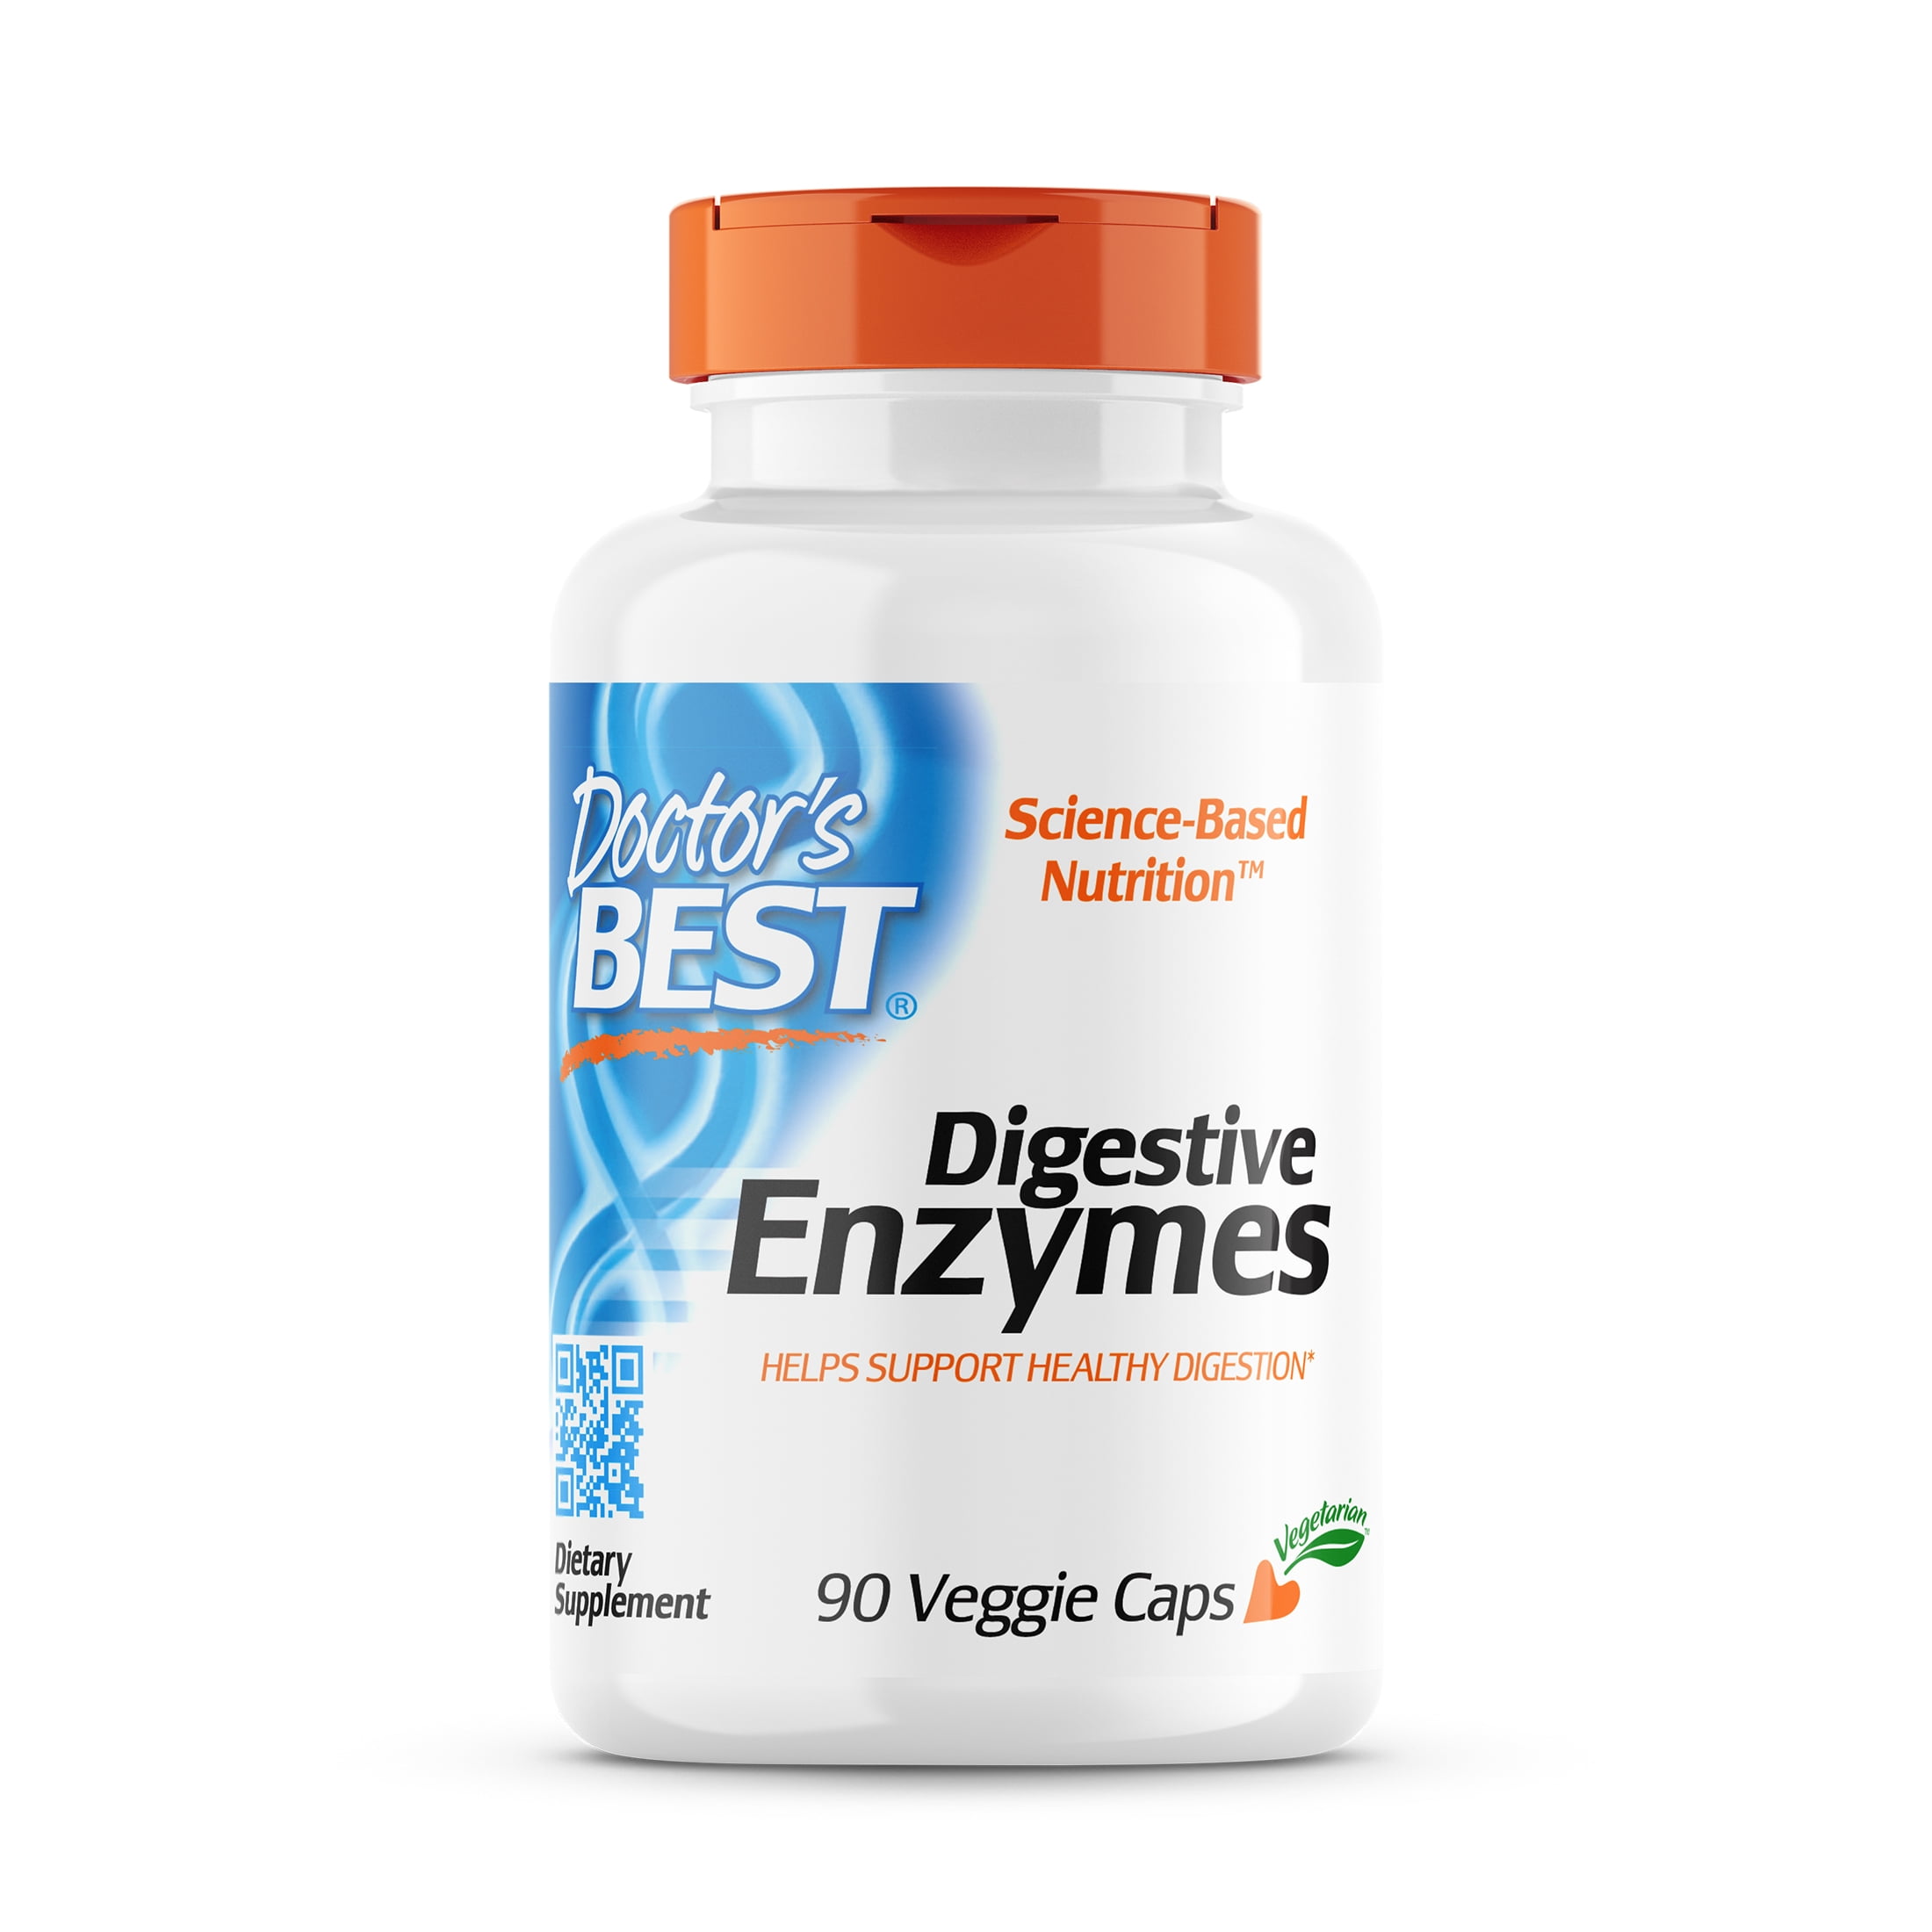  Silver Fern Brand Ultimate Digestive Enzyme Supplement